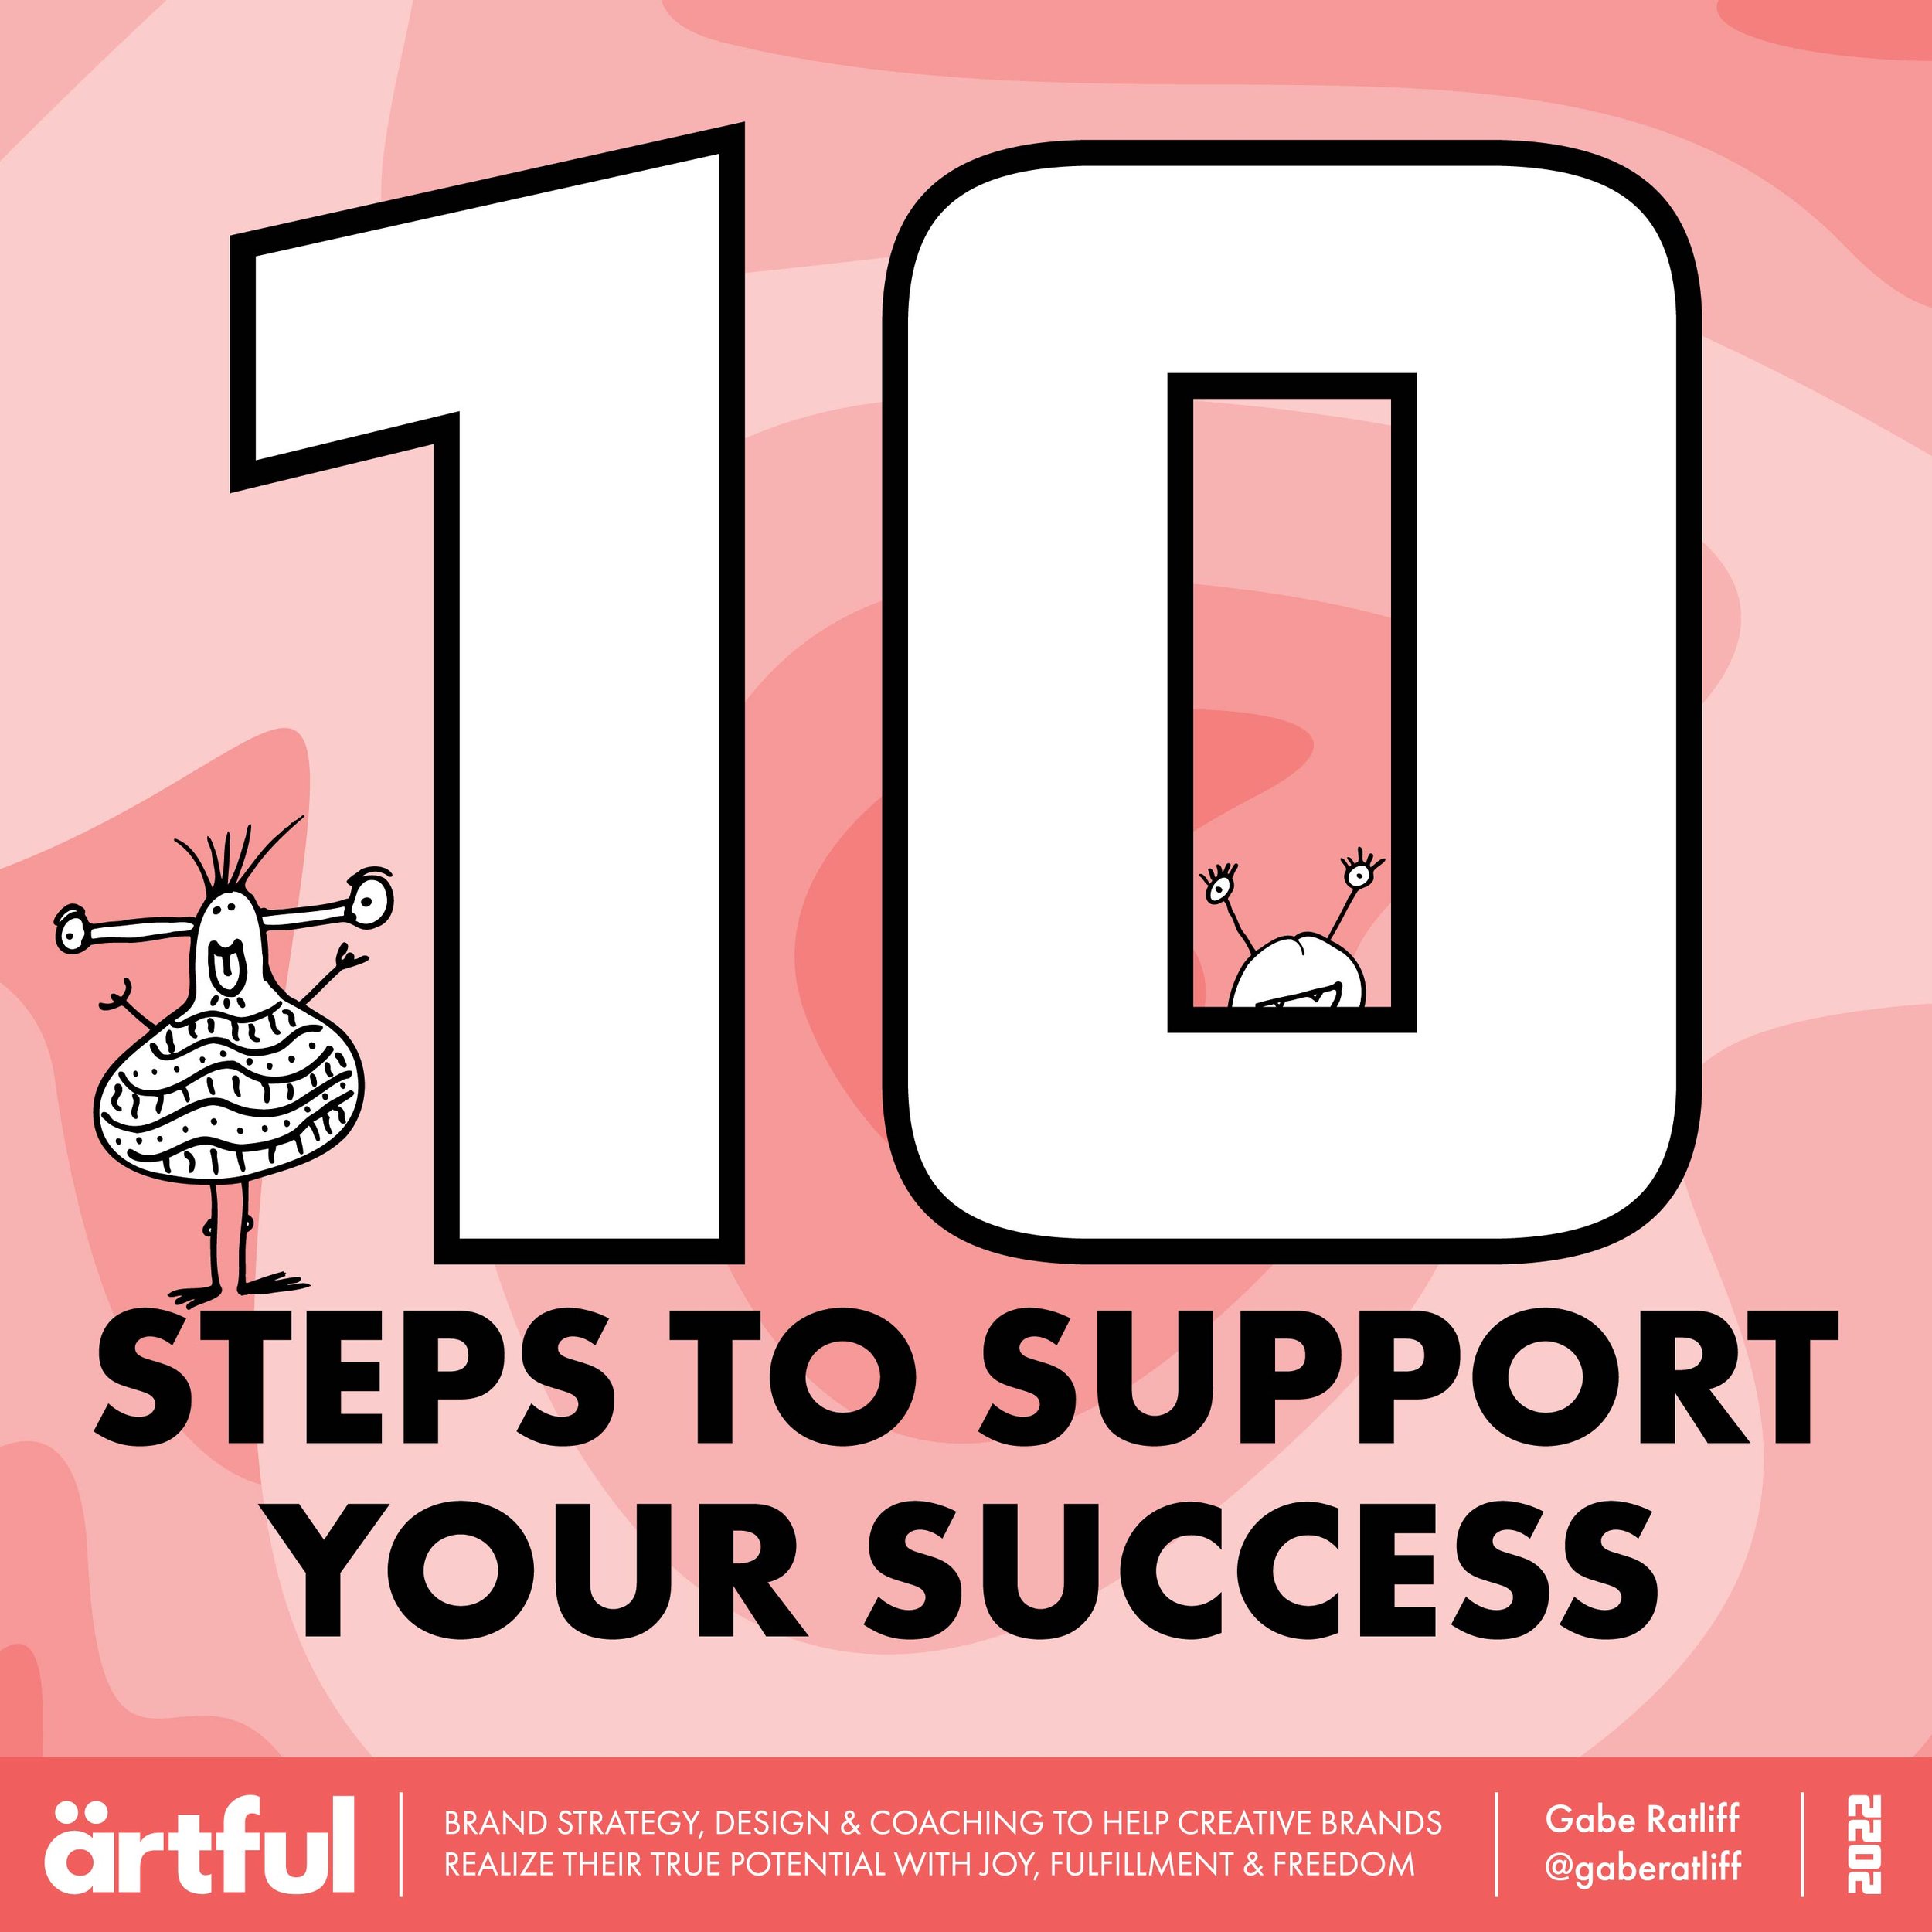 10 Steps to Support Your Success